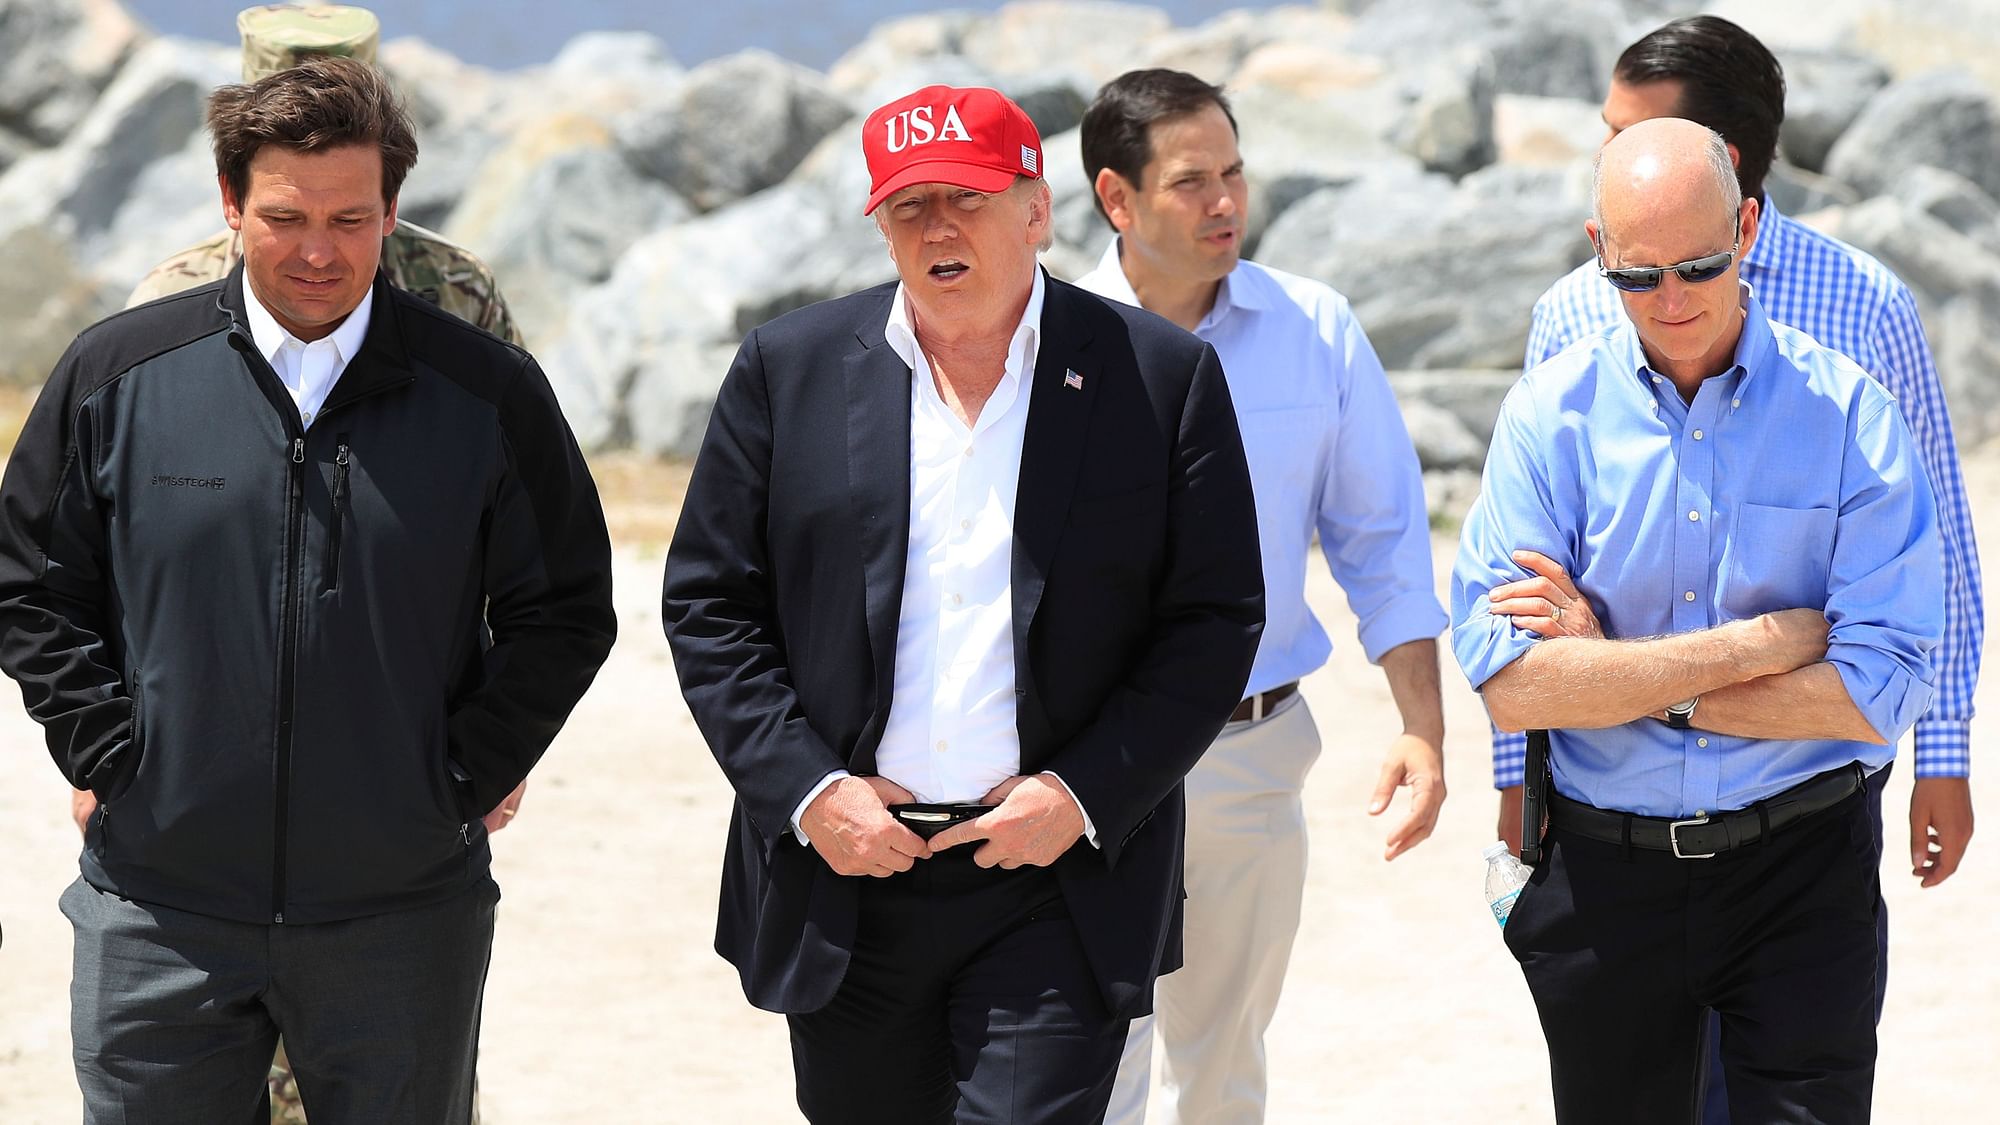 President Donald Trump with Florida Governor Ron DeSantis during a visit to Lake Okeechobee and Herbert Hoover Dike at Canal Point, Florida.